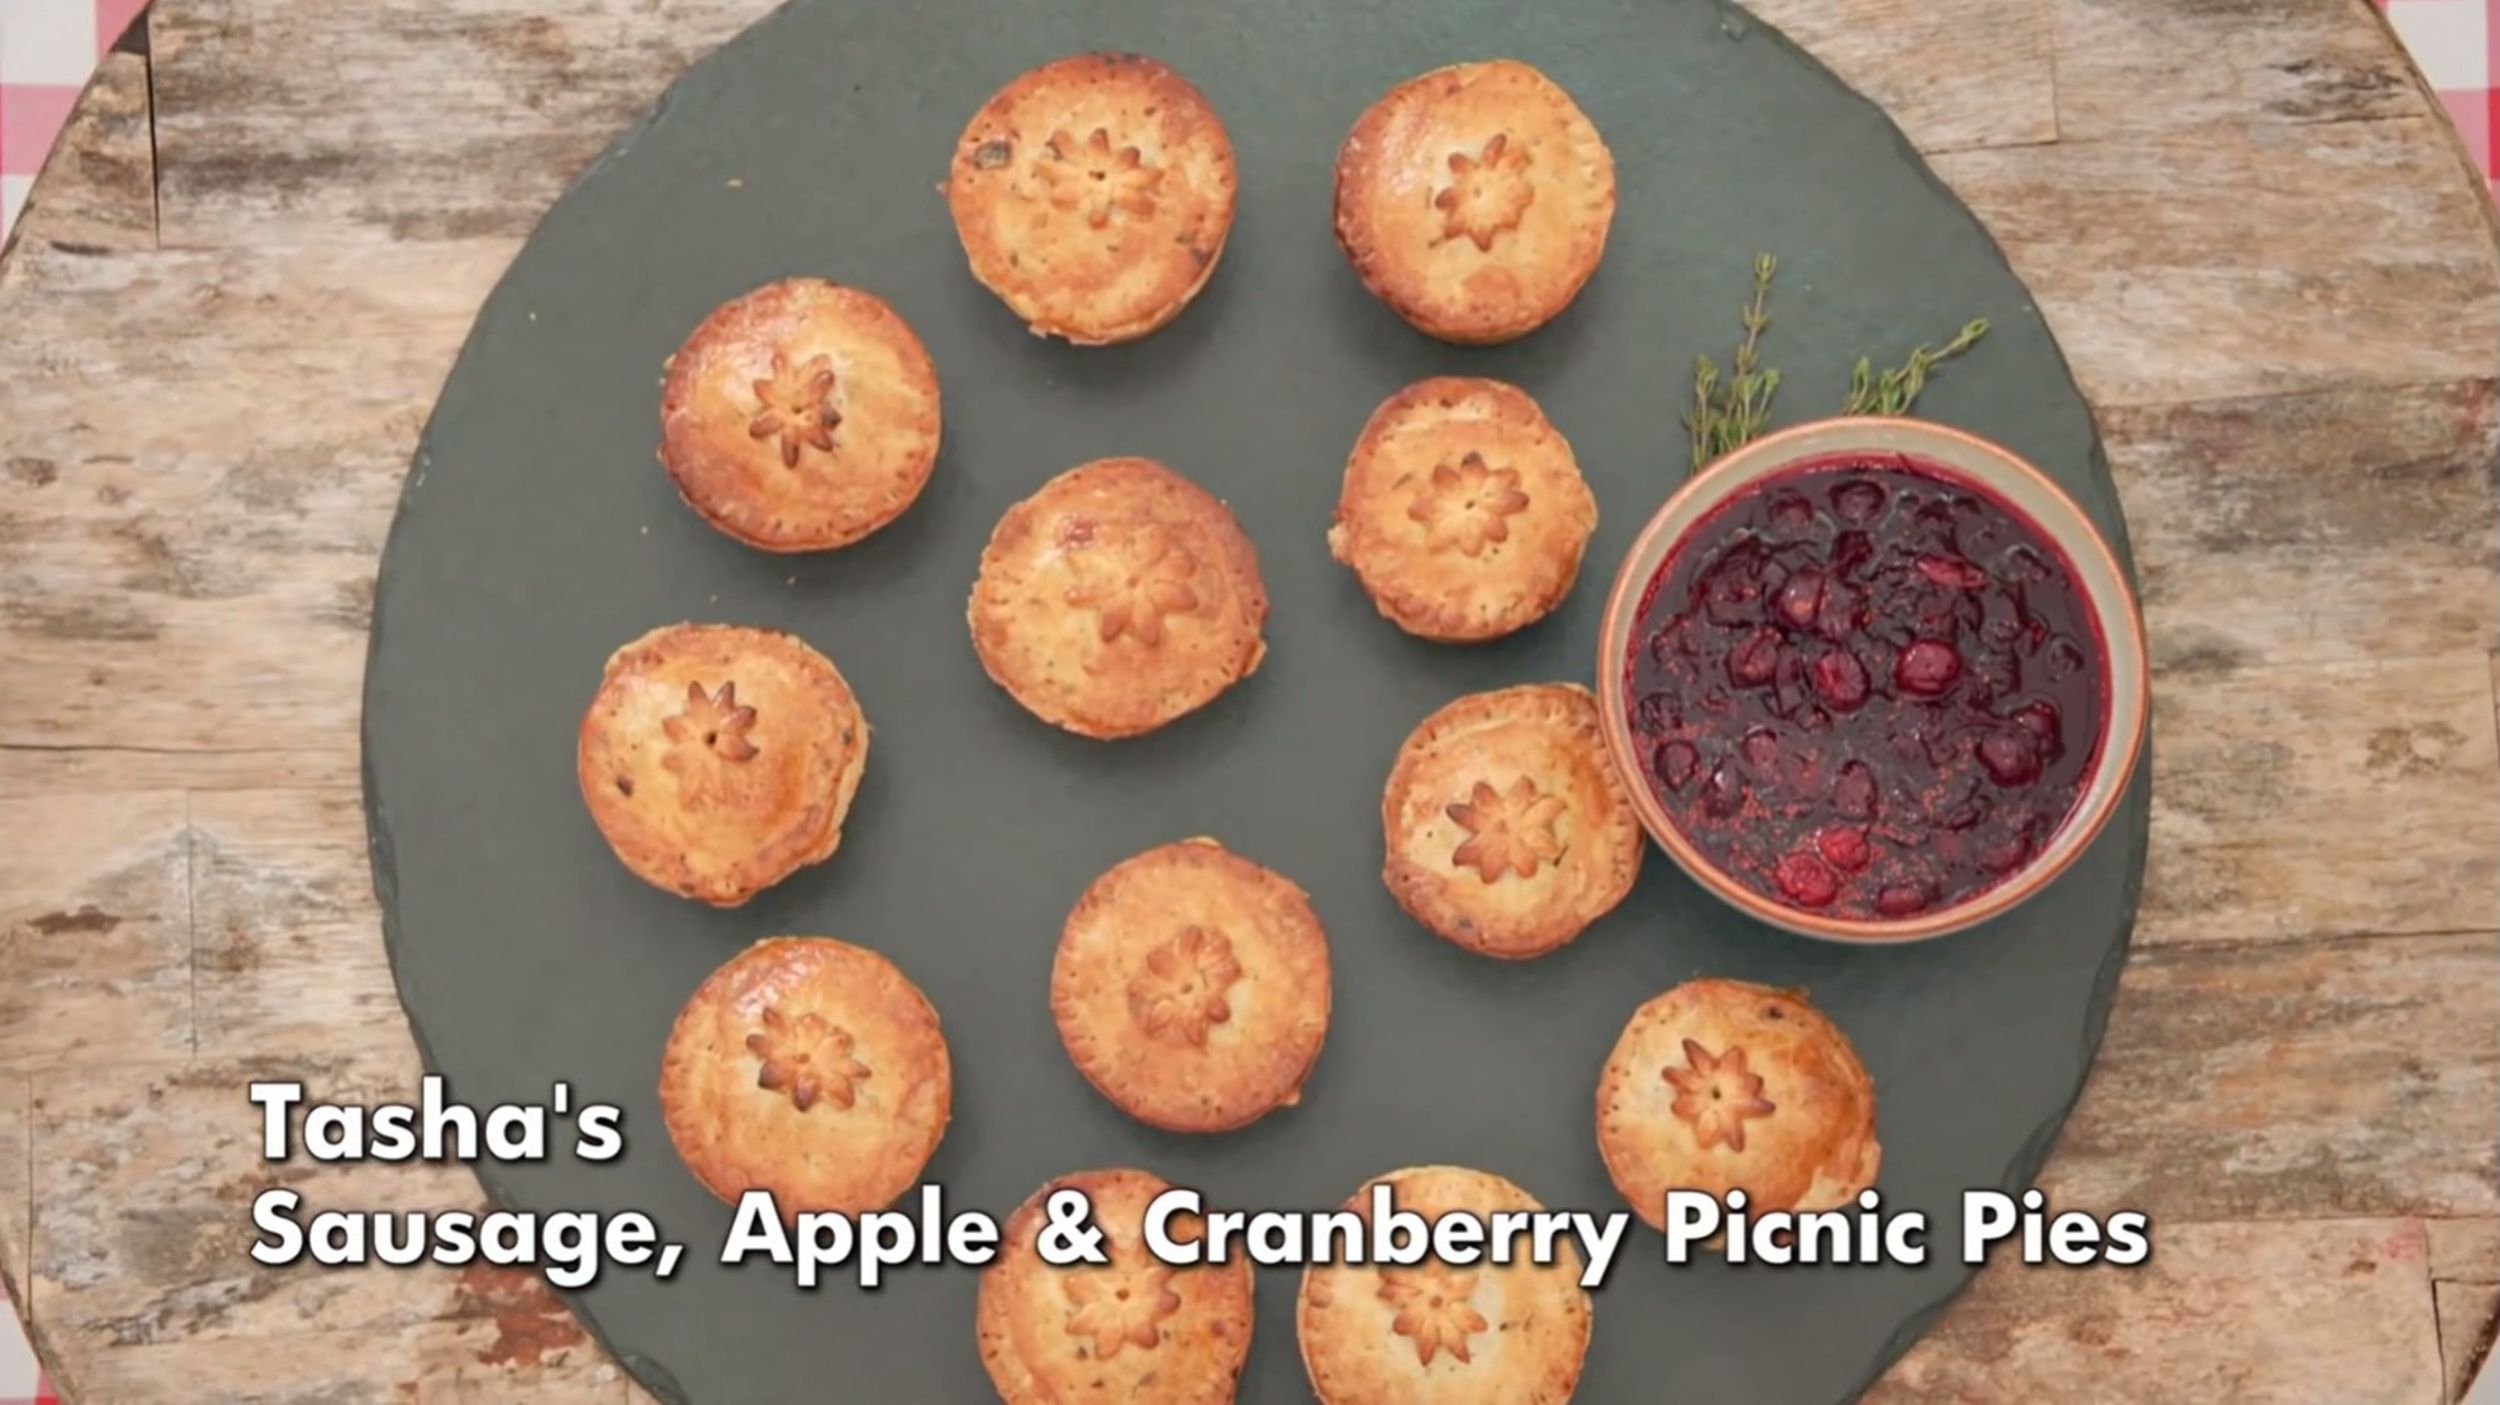 Tasha's Sausage Apple & Cranberry Picnic Pies Signature from 'The Great British Baking Show' Season 14's Pastry Week